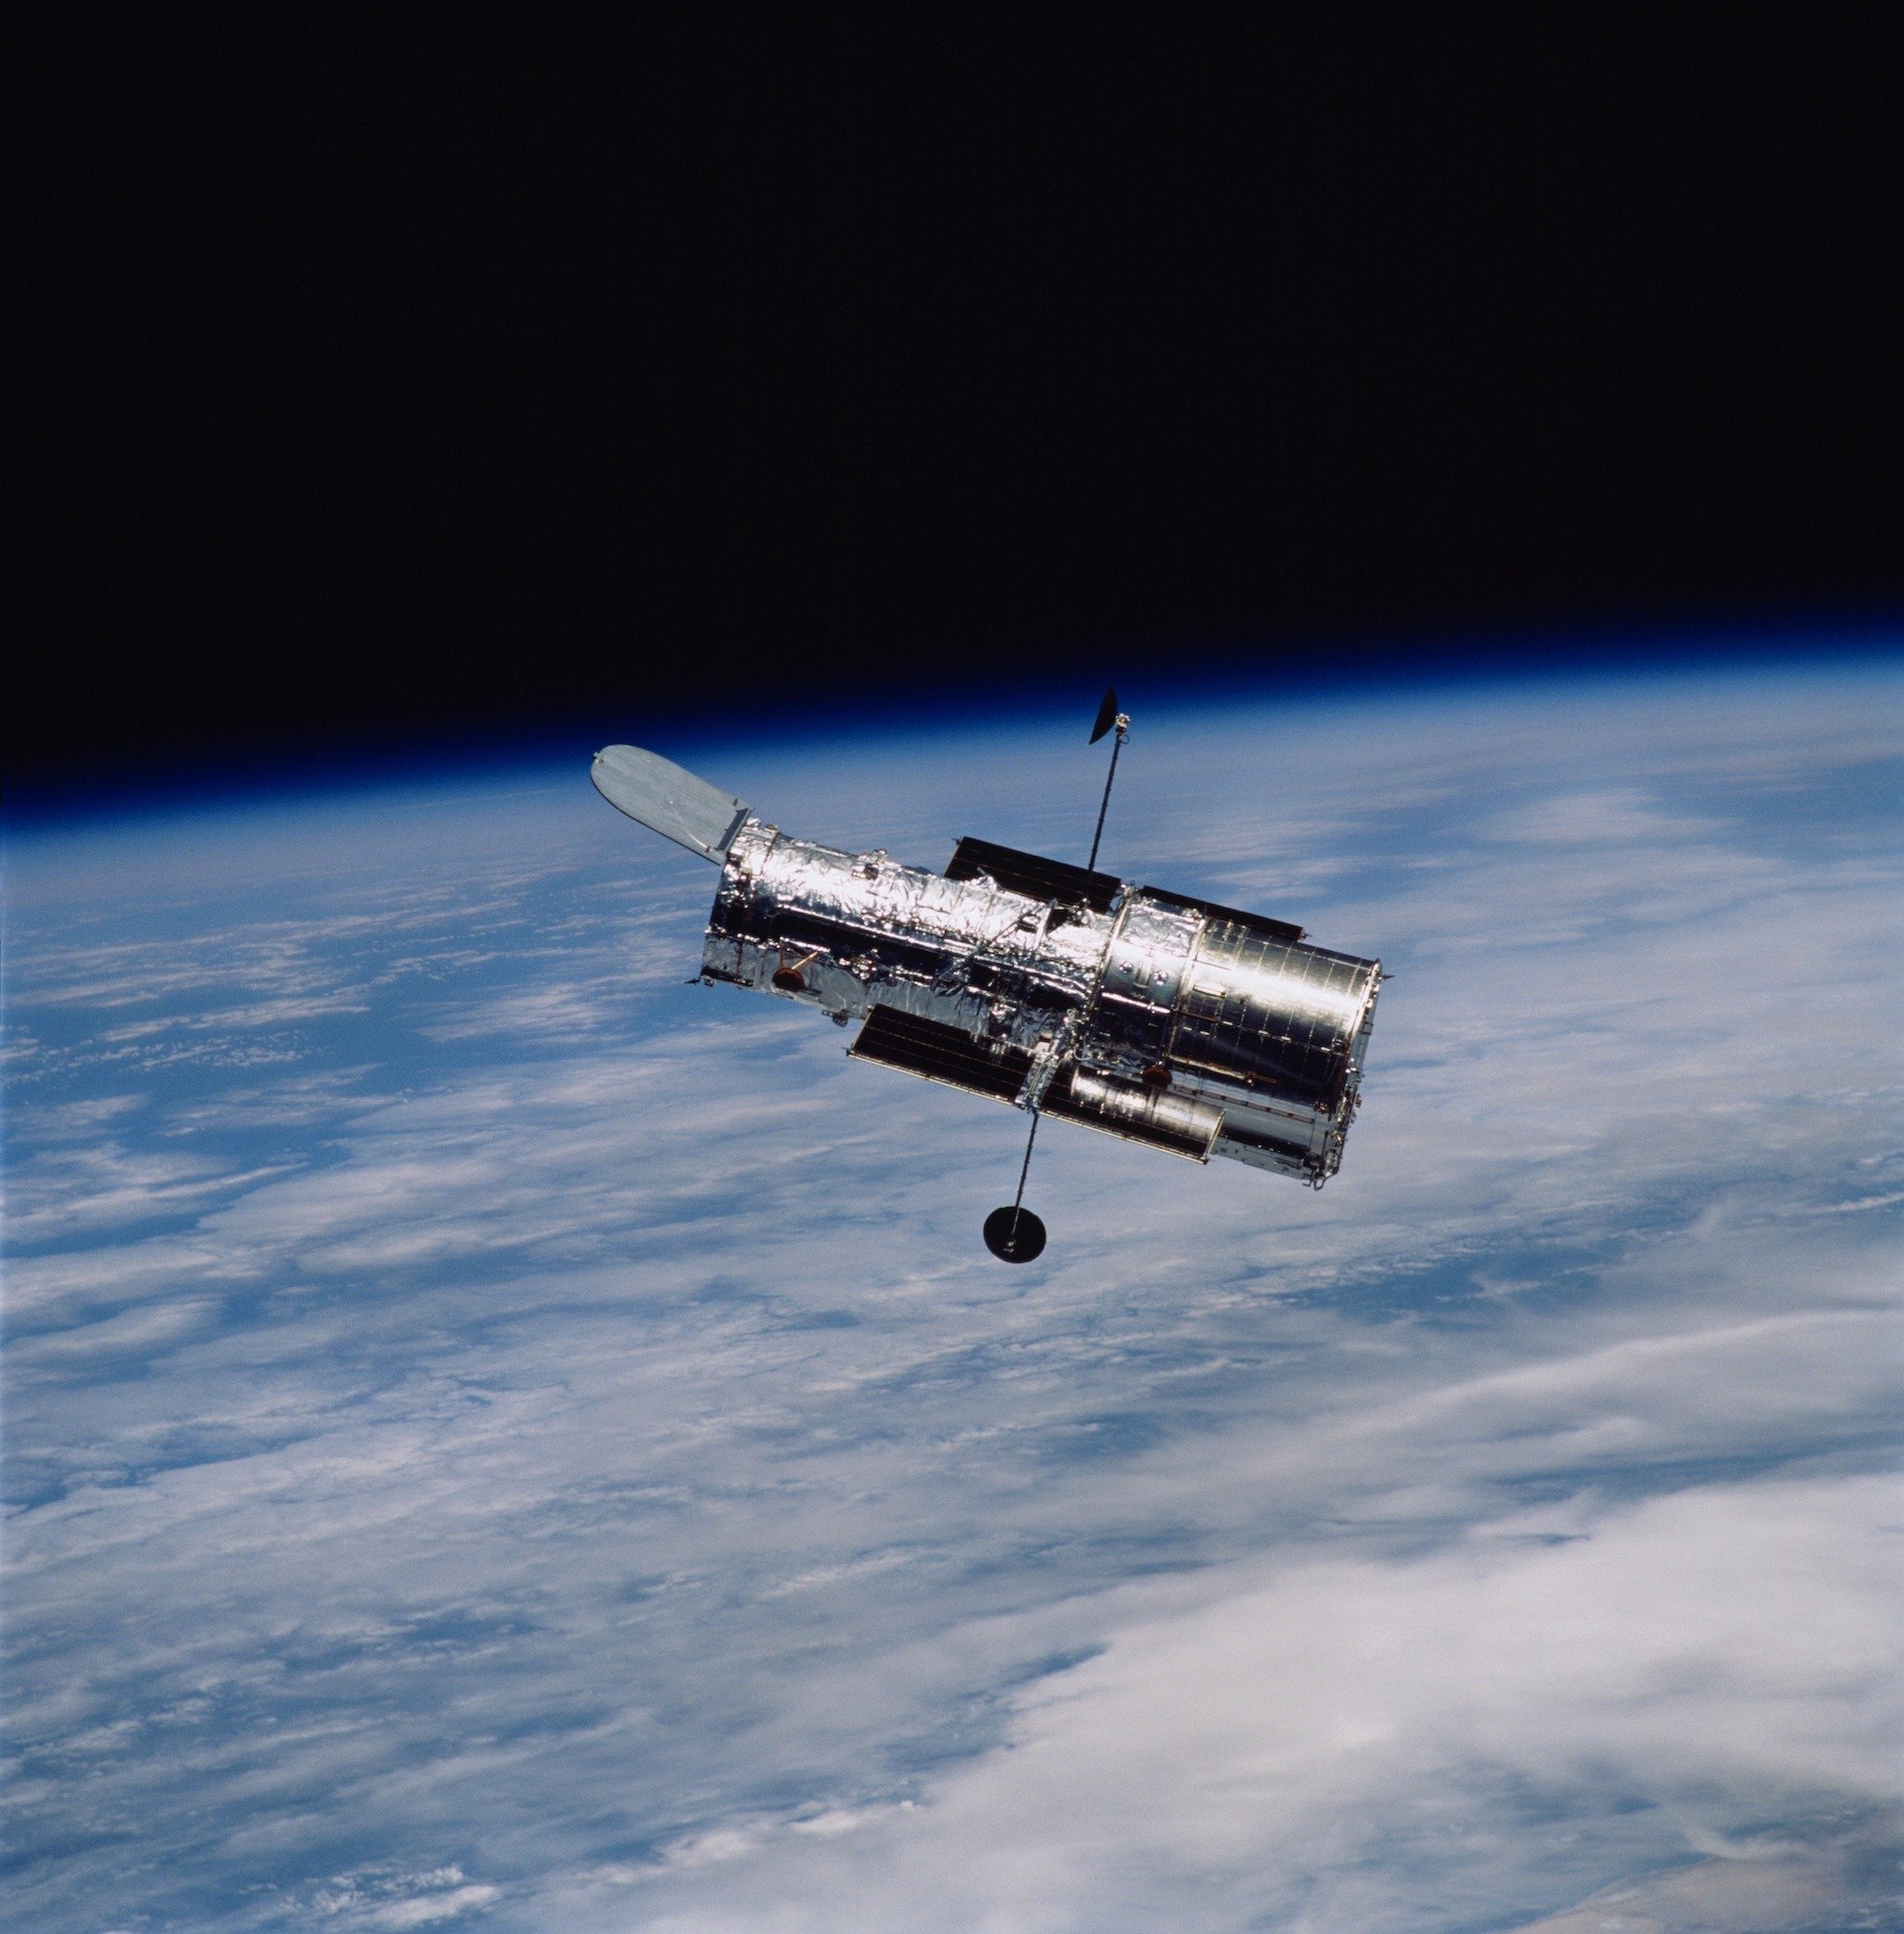 The Hubble Space Telescope orbiting above Earth.